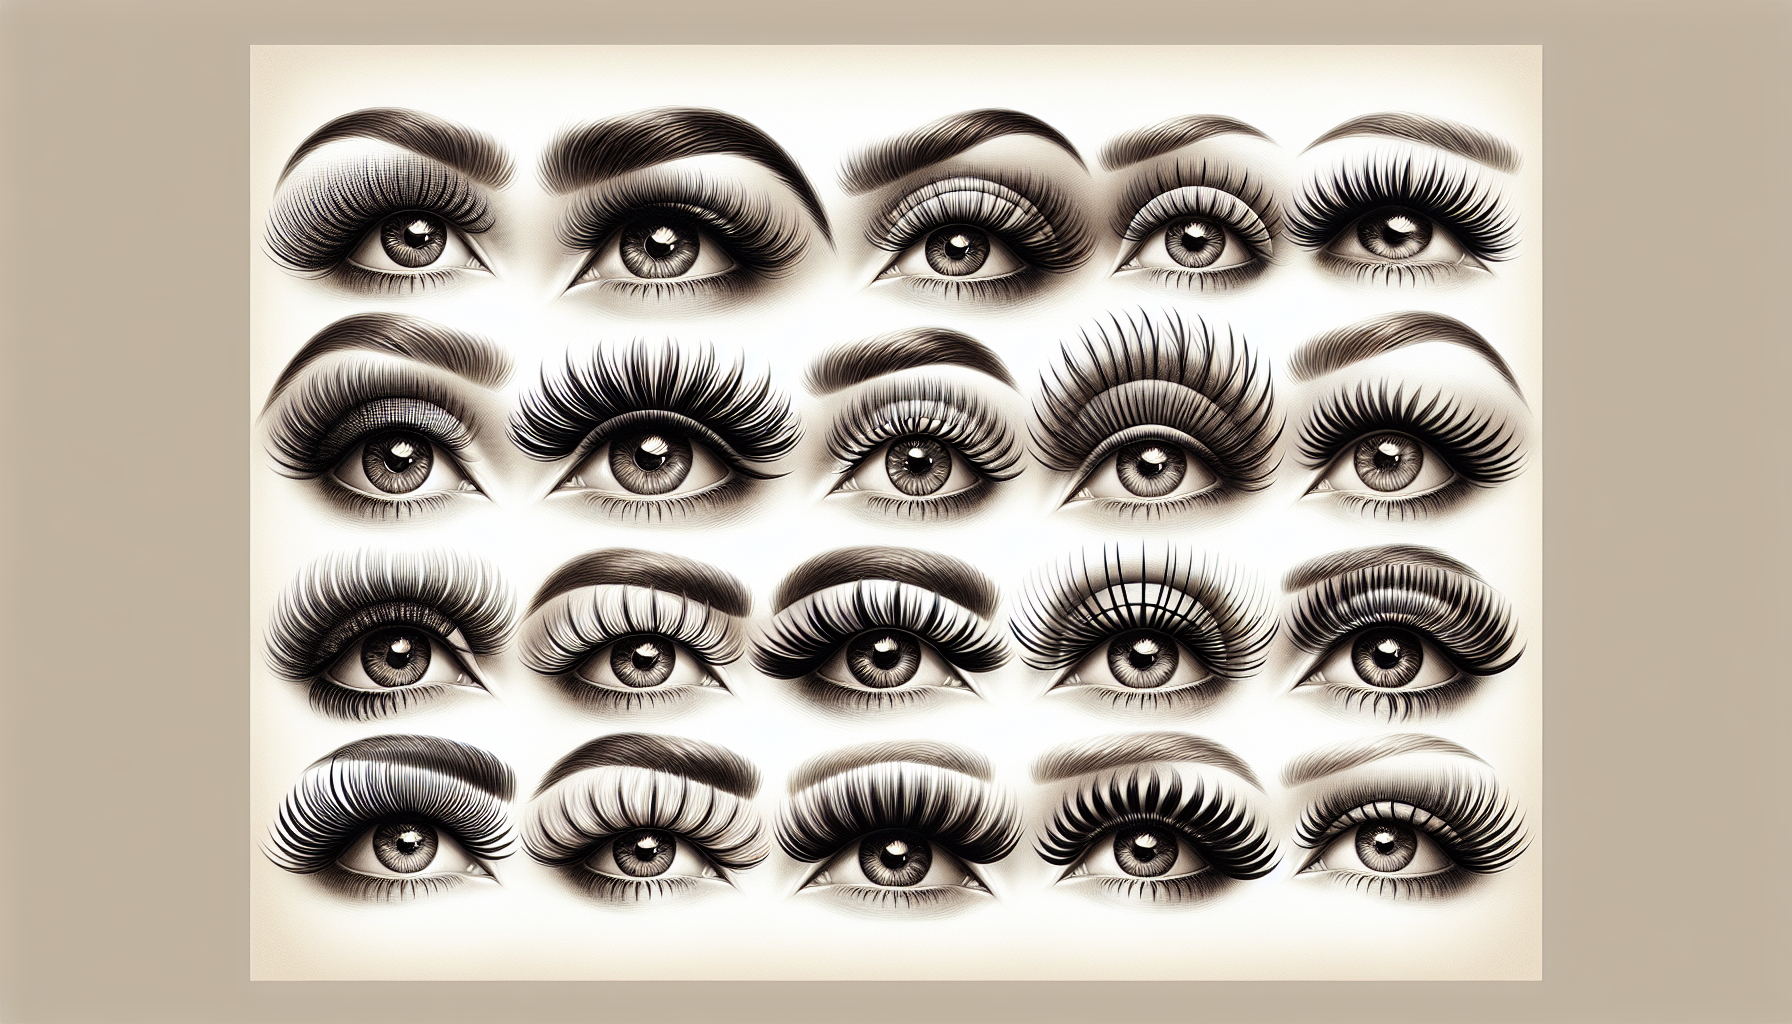 Illustration of styling tips for lash clusters